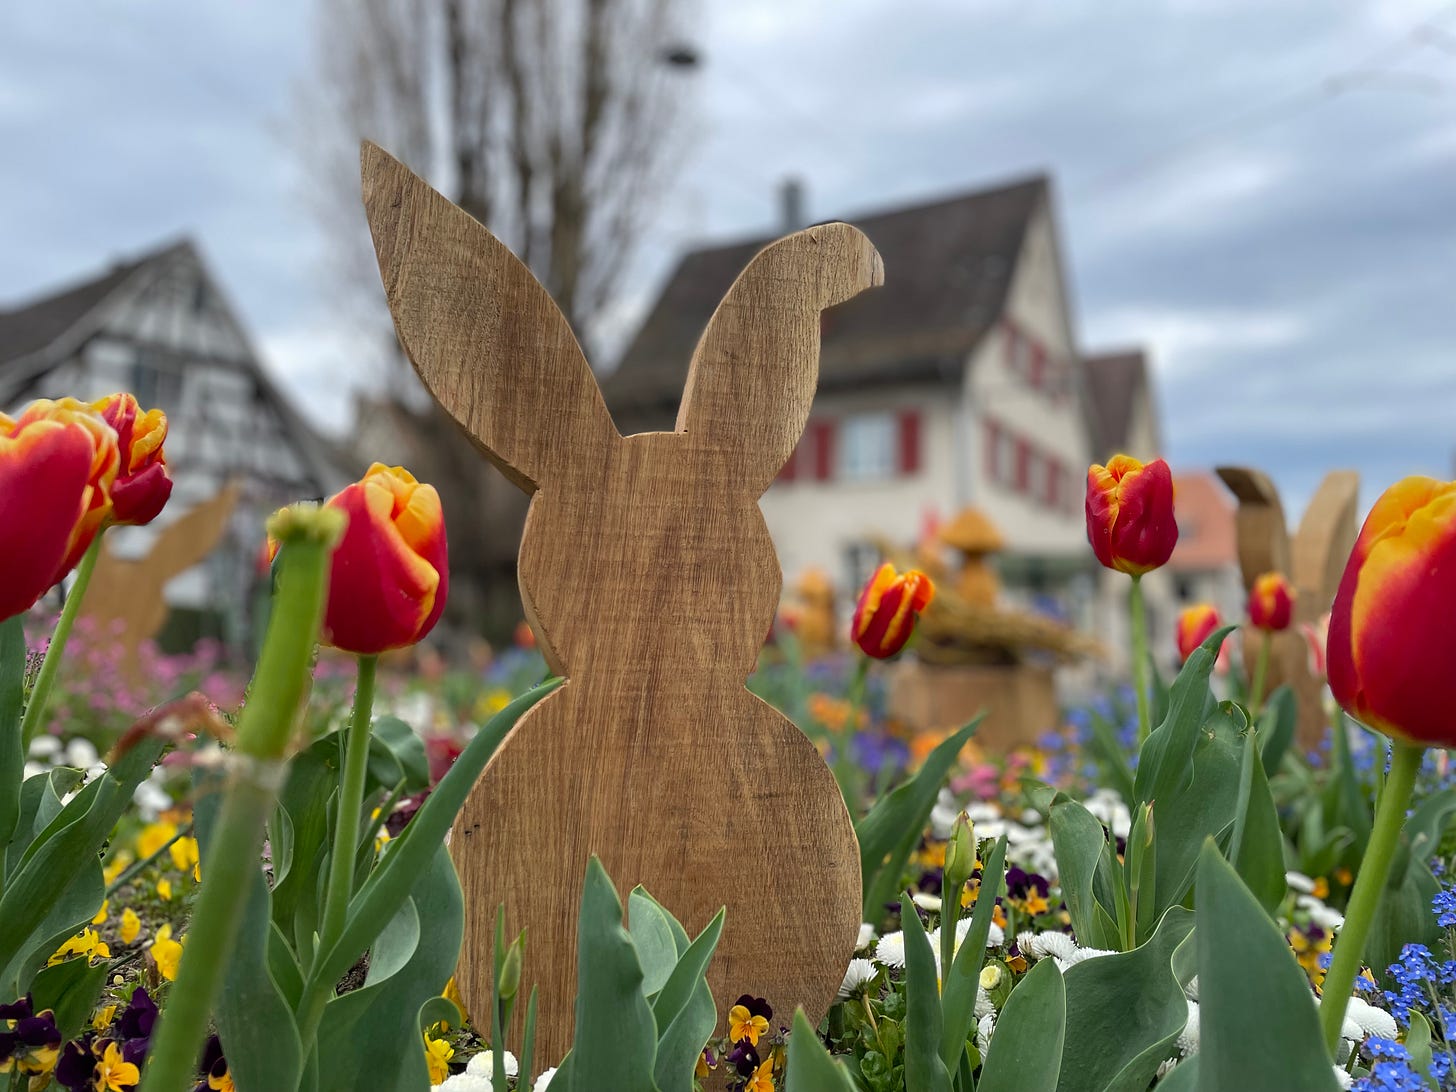 A wooden rabbit silhouette surrounded by tulips